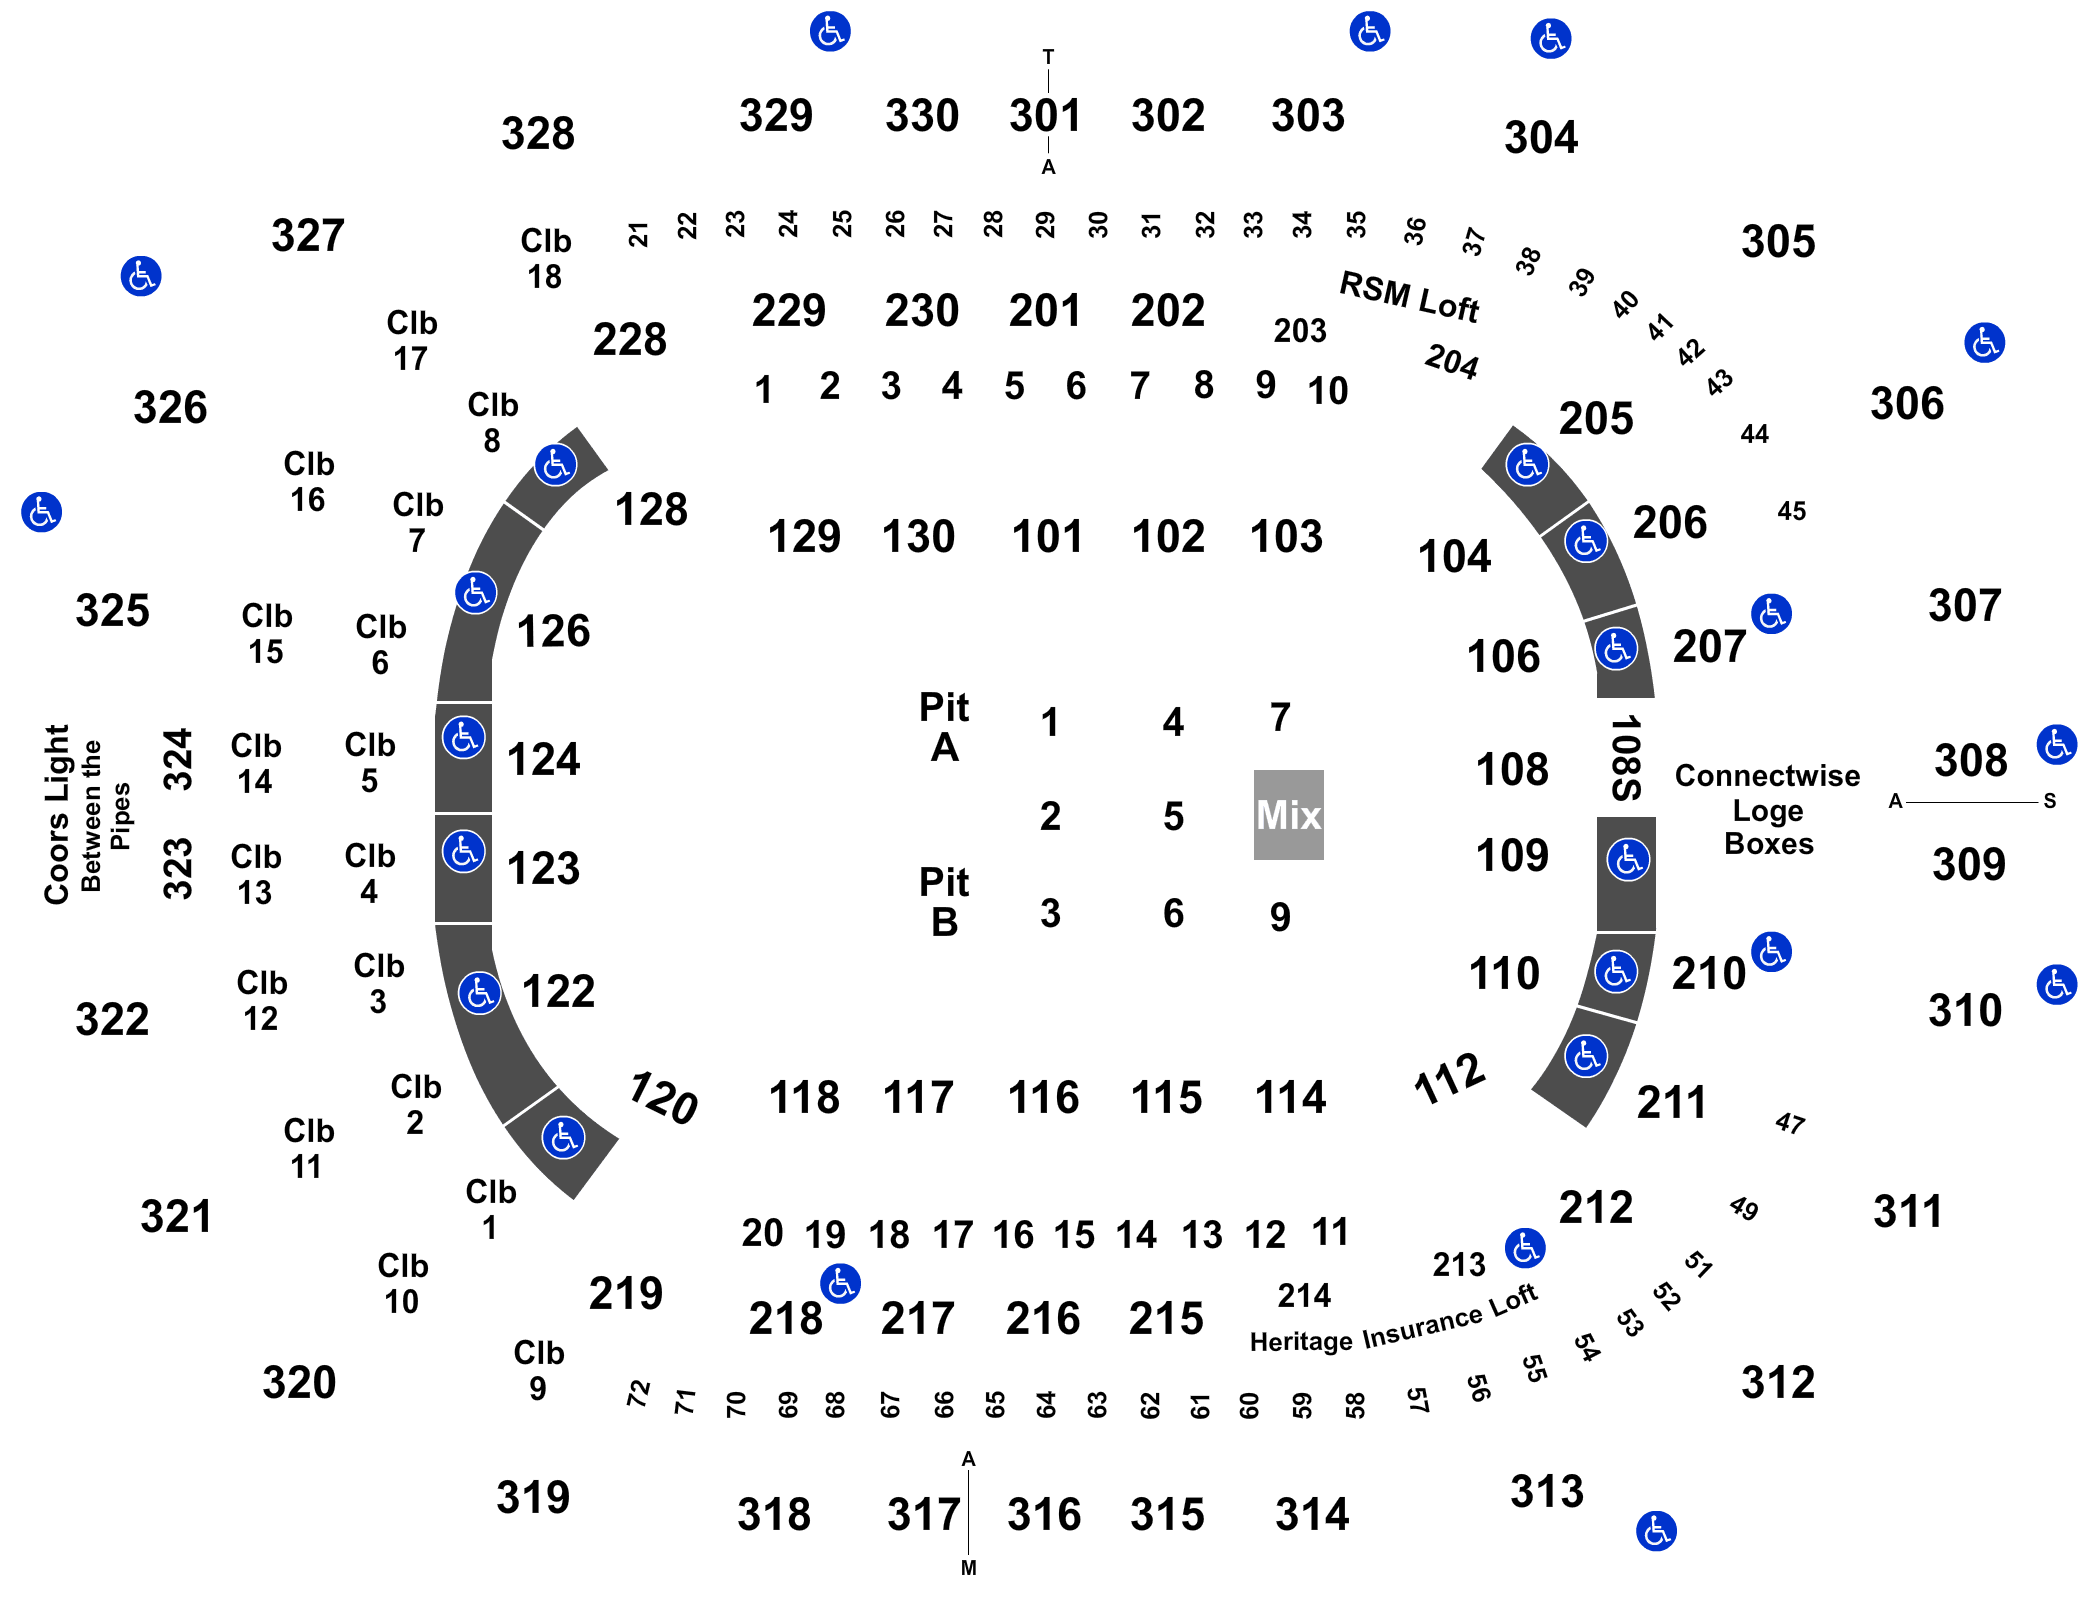 Amalie Arena Tickets & Seating Chart - Event Tickets Center